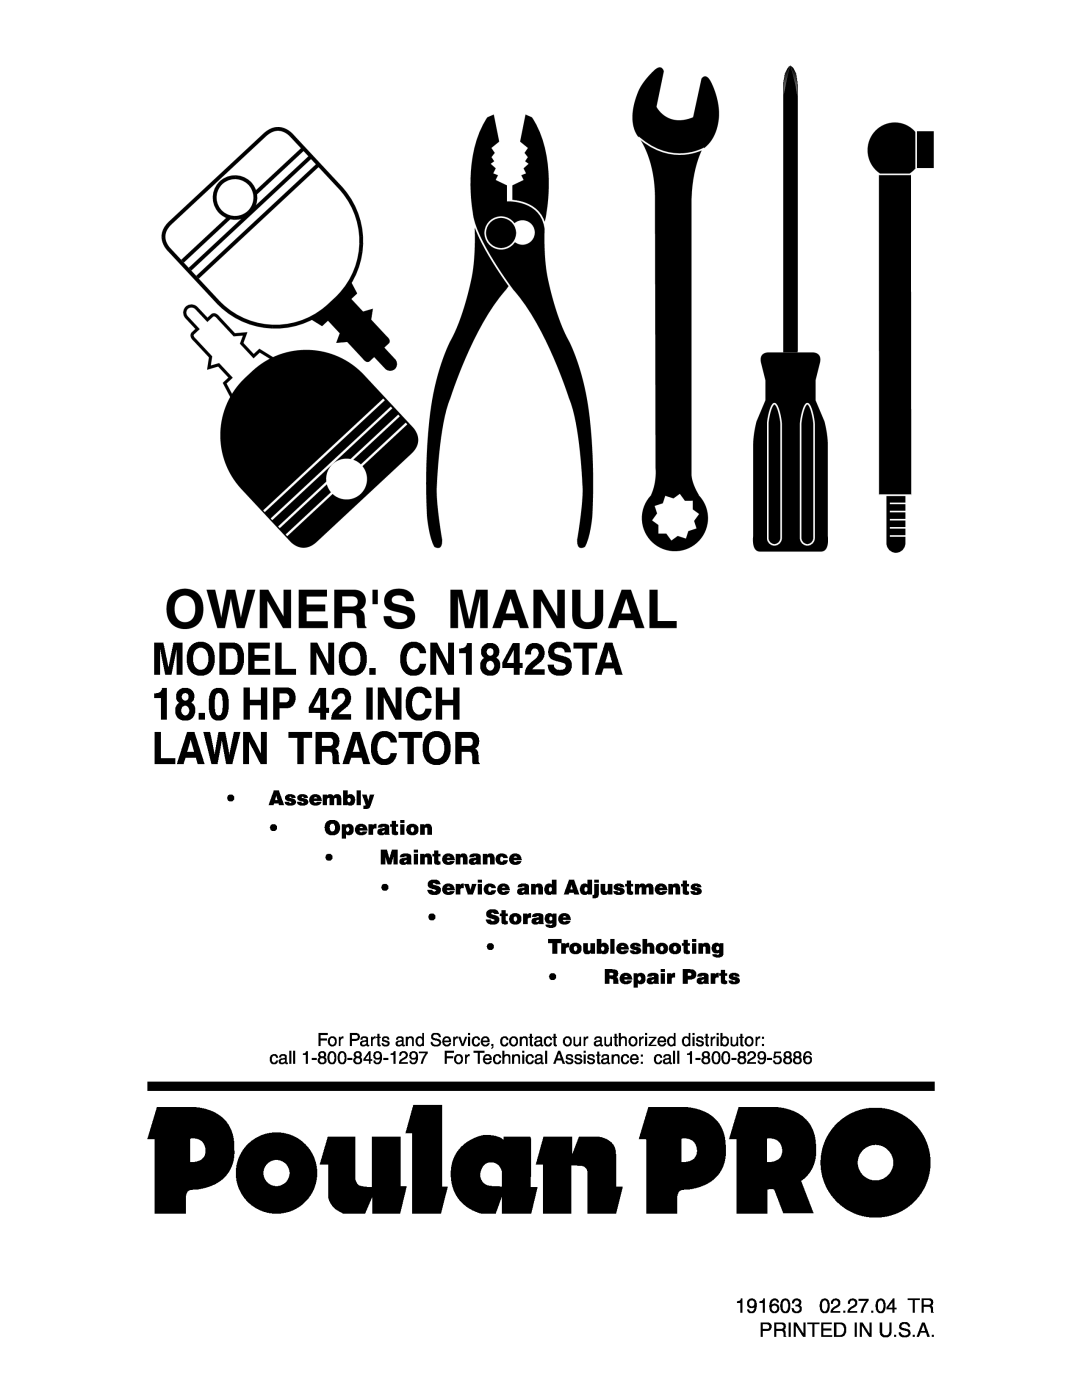 Poulan CN1842STA manual Assembly Operation Maintenance Service and Adjustments Storage, Troubleshooting Repair Parts 